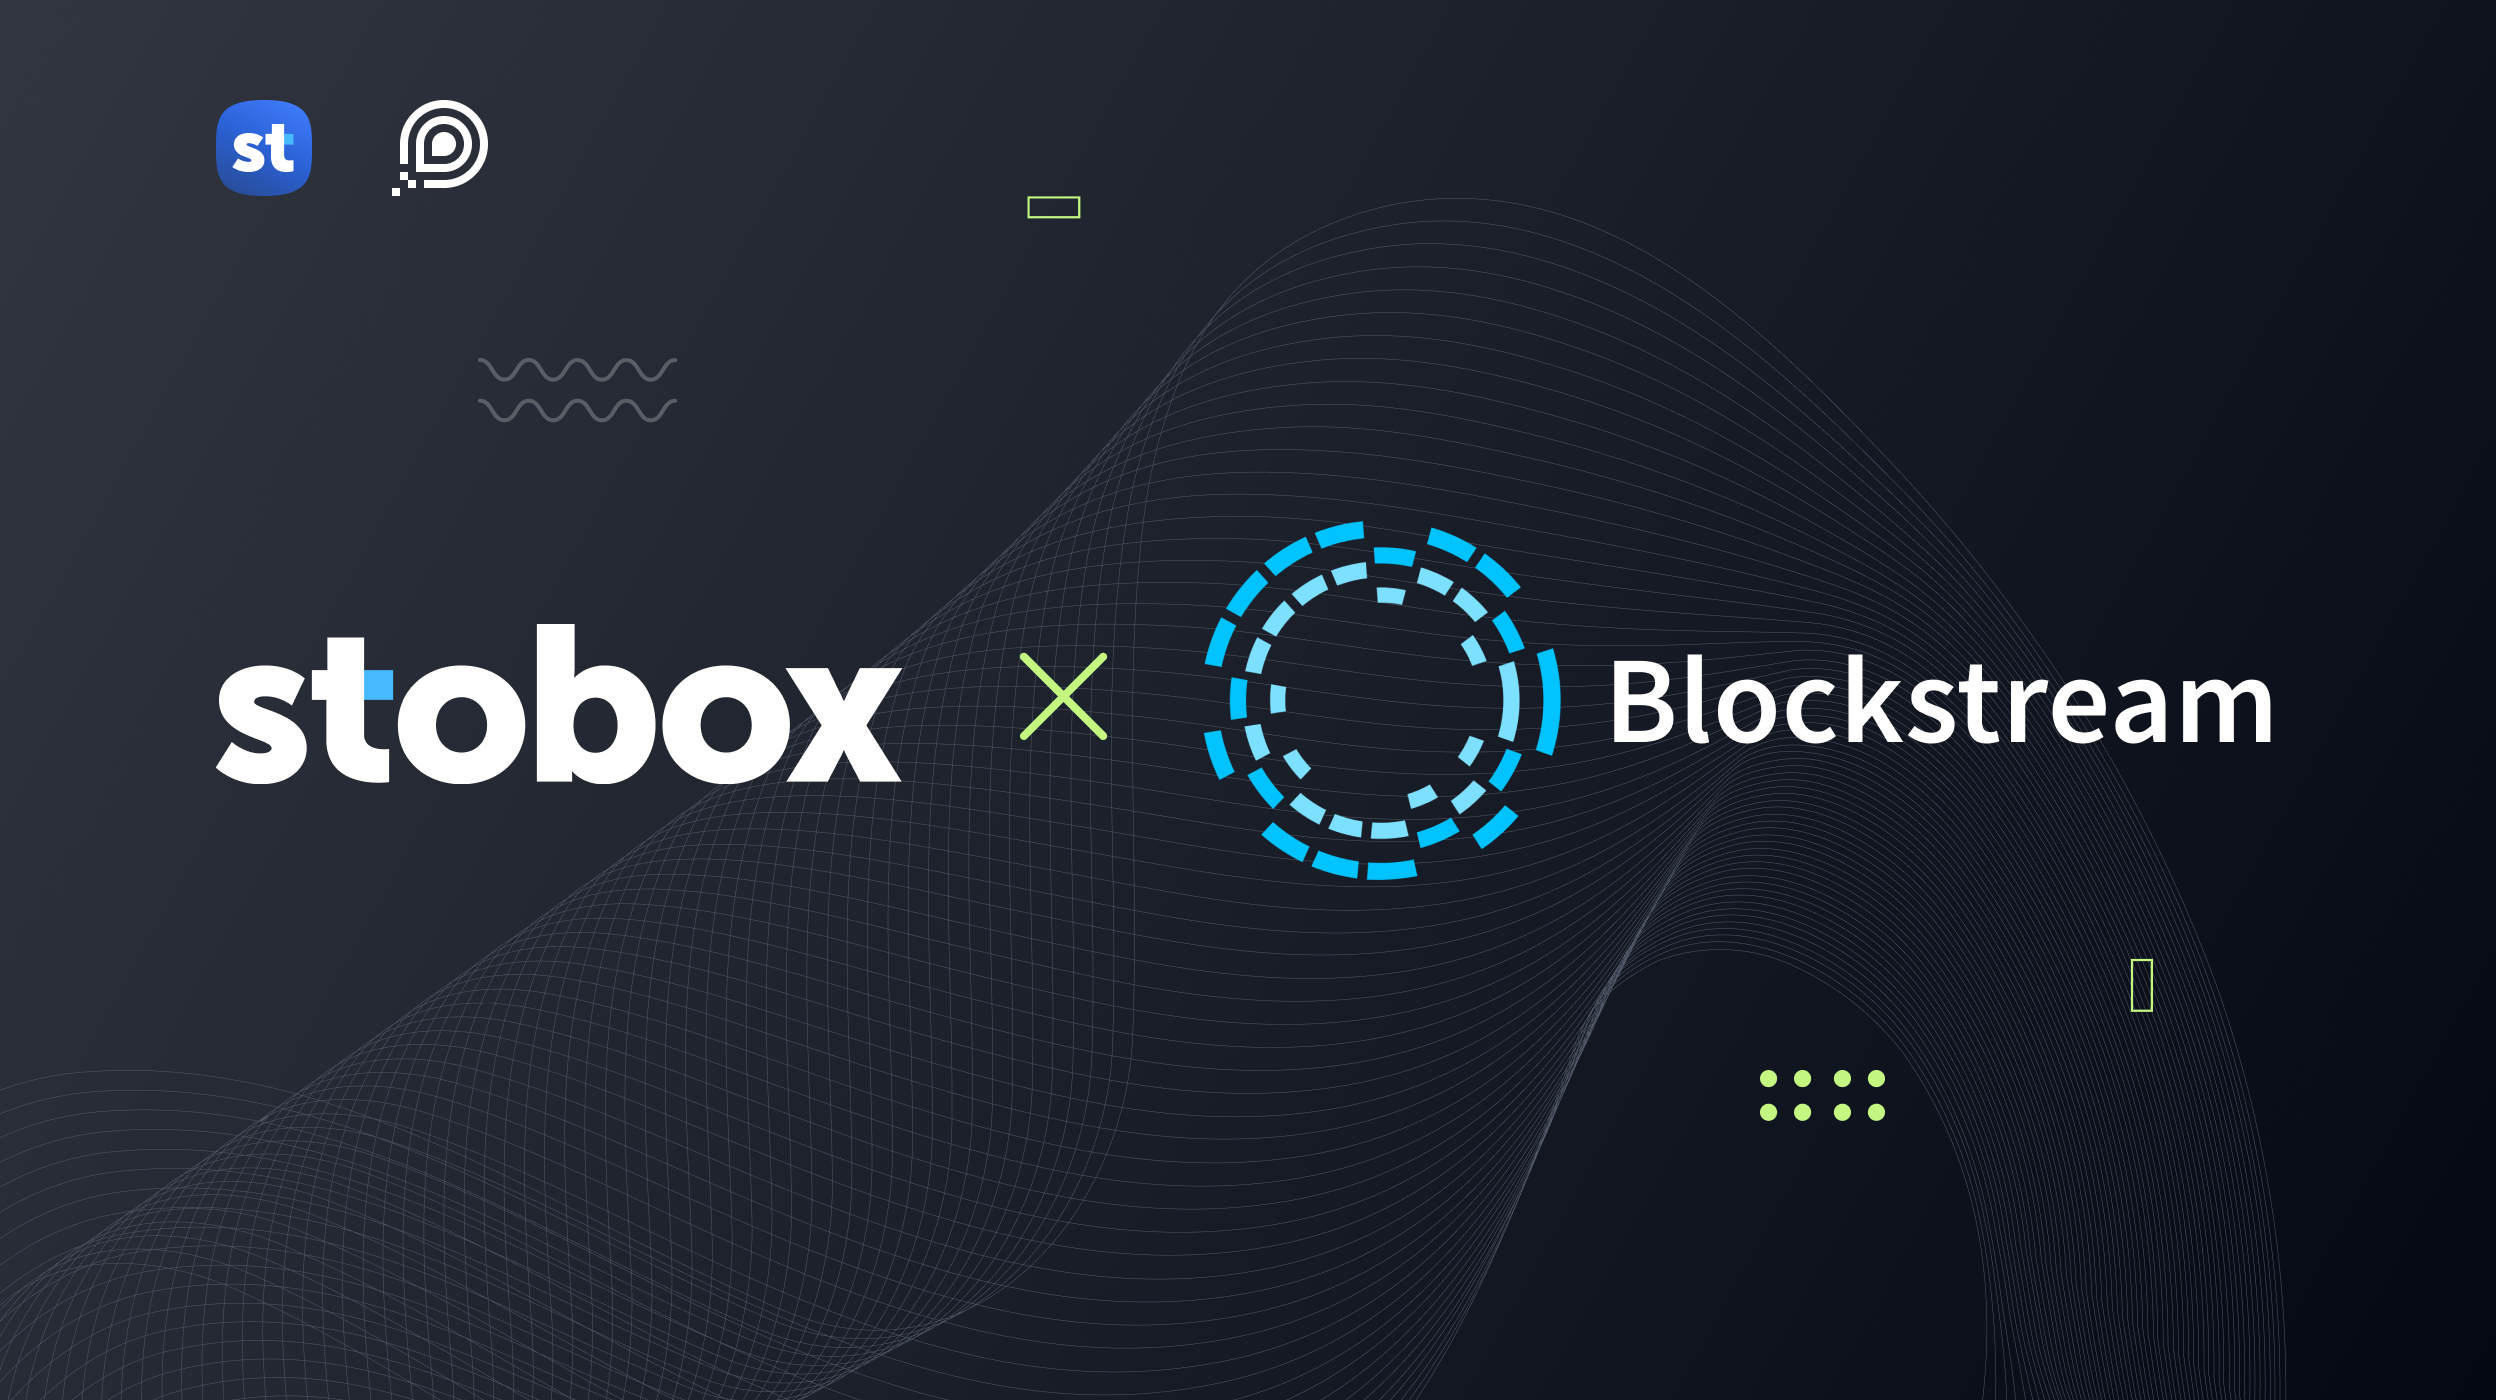 Stobox signed an MoU with Blockstream!